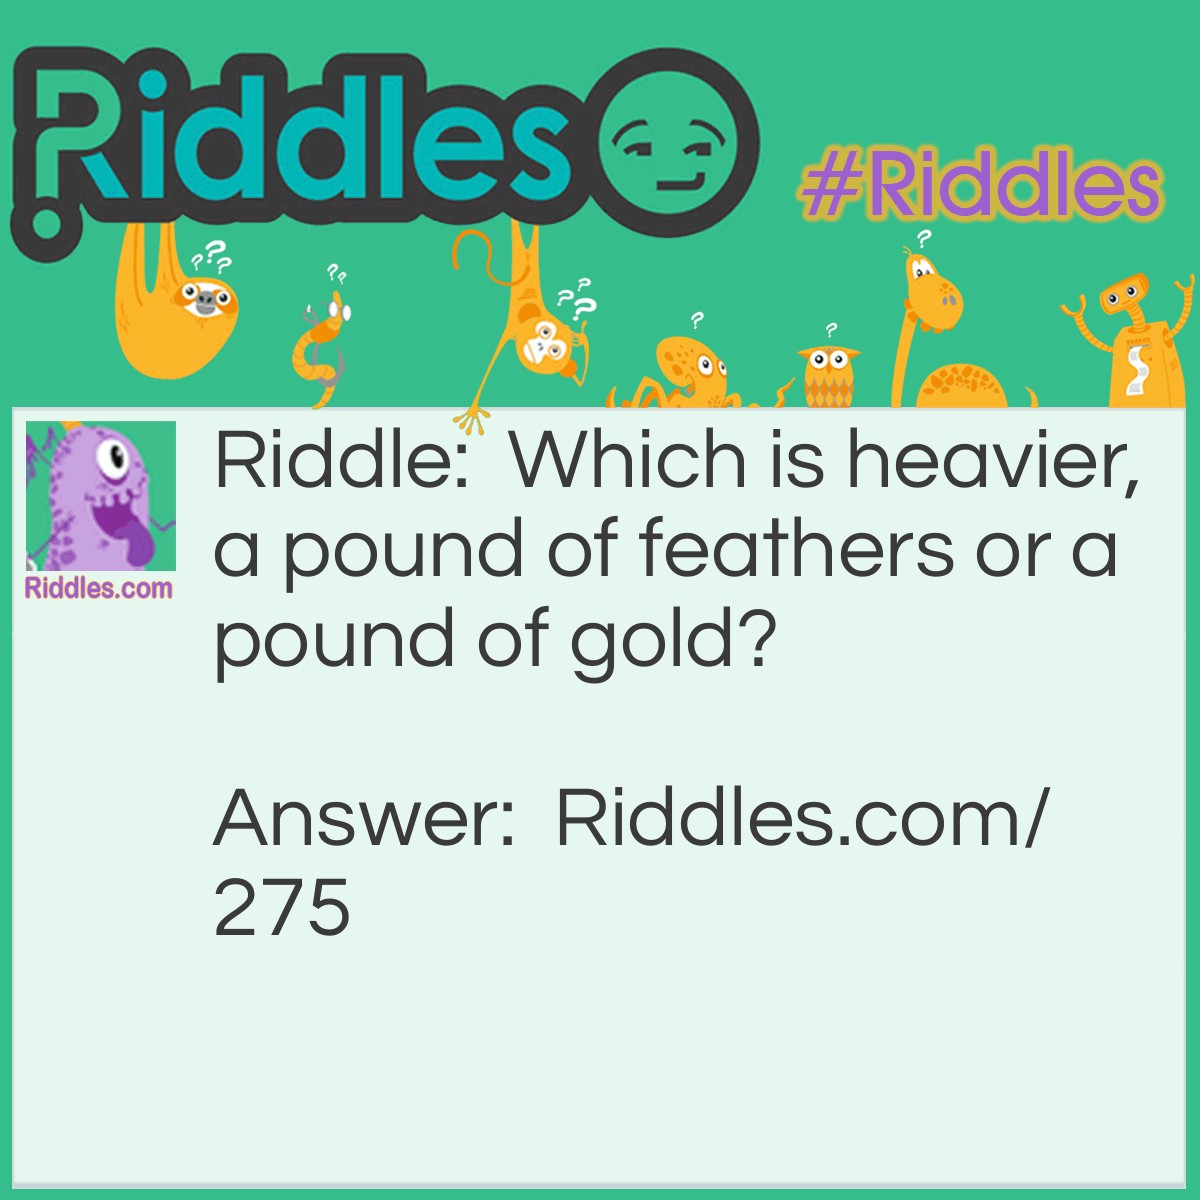 Riddle: Which is heavier, a pound of feathers or a pound of gold? Answer: A pound of feathers. Some would say a pound is a pound, but the fact is: Gold is a precious metal and is therefore weighed in the Troy system of measurement. This means that a pound of gold weighs only 12 oz and a pound of feathers weighs 16 oz.